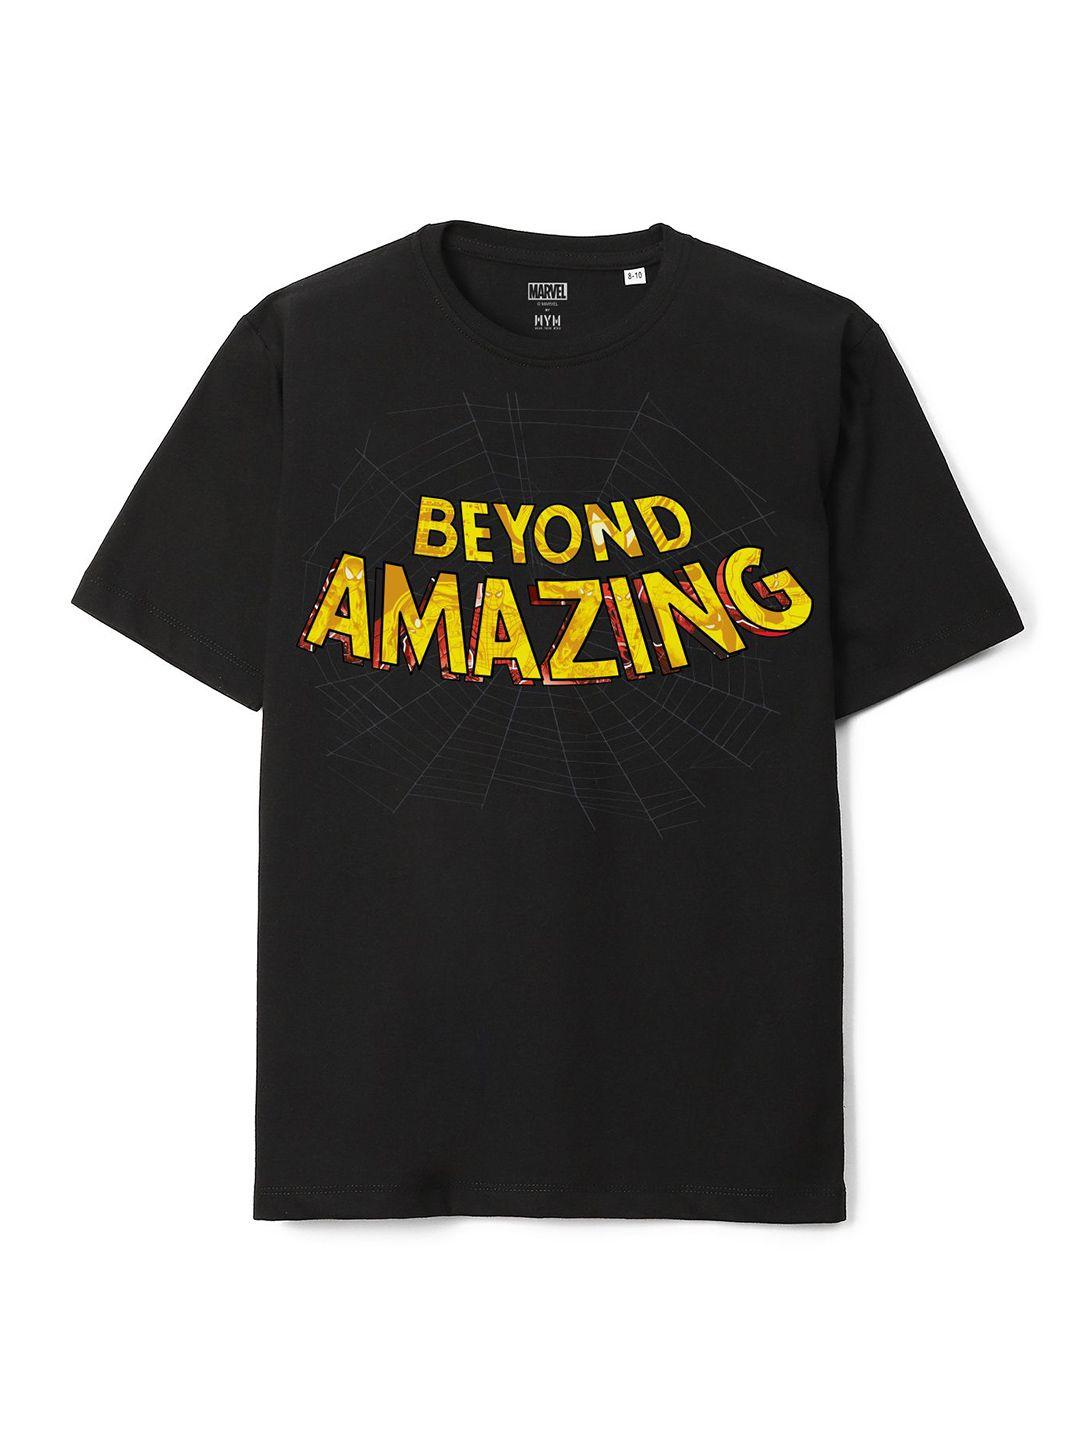 wear-your-mind-boys-black-typography-printed-applique-loose-t-shirt